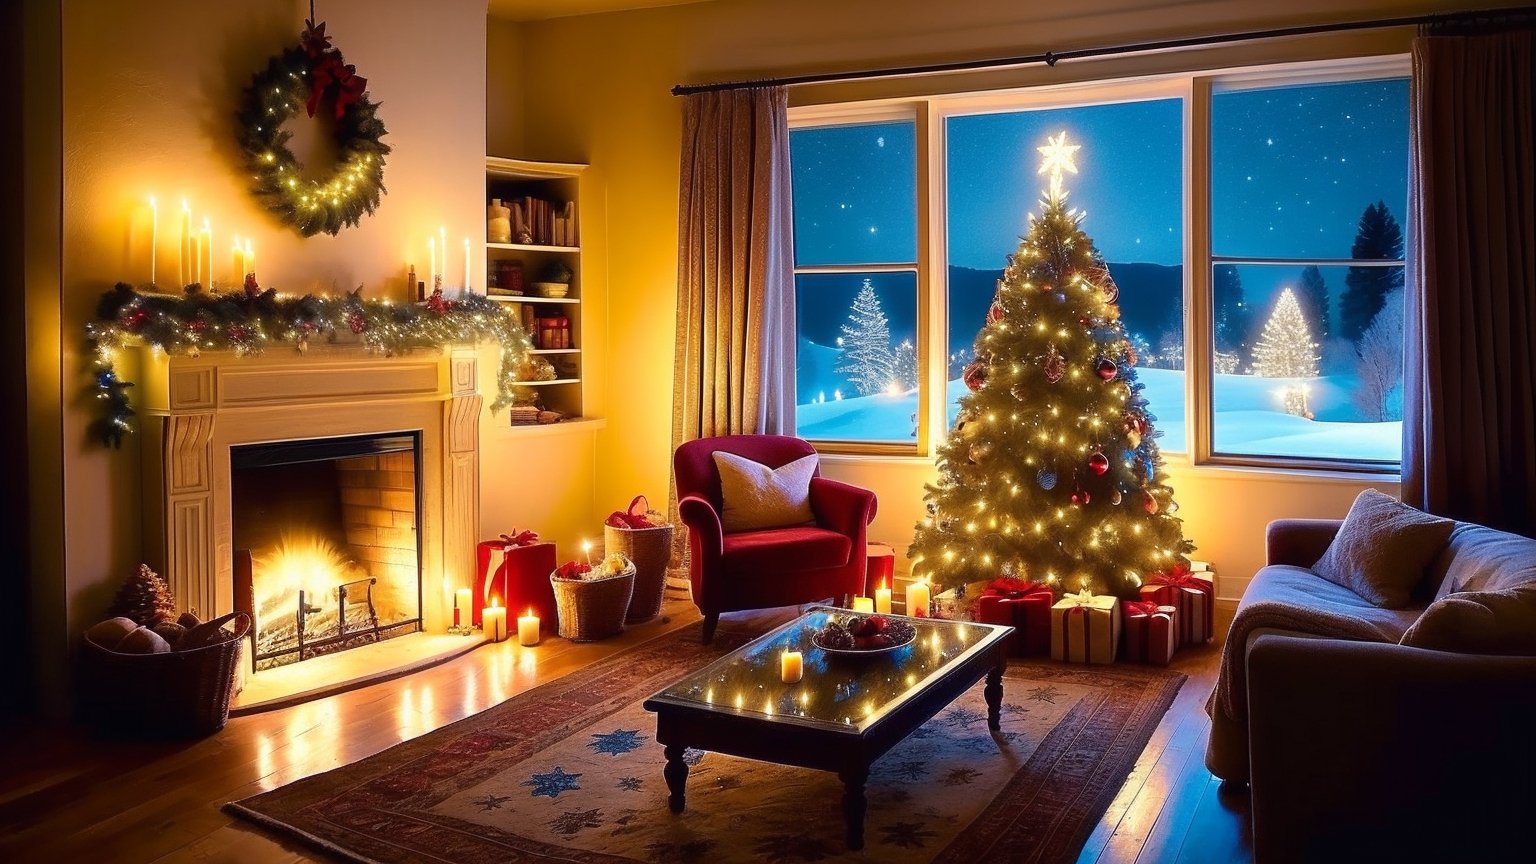 On this serene Christmas night, stars gently illuminate the sky, the fireplace diffuses a stable warmth, and the Christmas tree lights softly twinkle. The fragrance of gifts diffuses steadily, and the aroma of spices gently spreads. Outside the window, snowflakes fall steadily, and the laughter of family members is transmitted harmoniously. Soft music continues to play, blankets provide a comfortable embrace, and curtains sway gently in a stable rhythm. This Christmas night, a stable diffusion of warmth permeates the entire space.